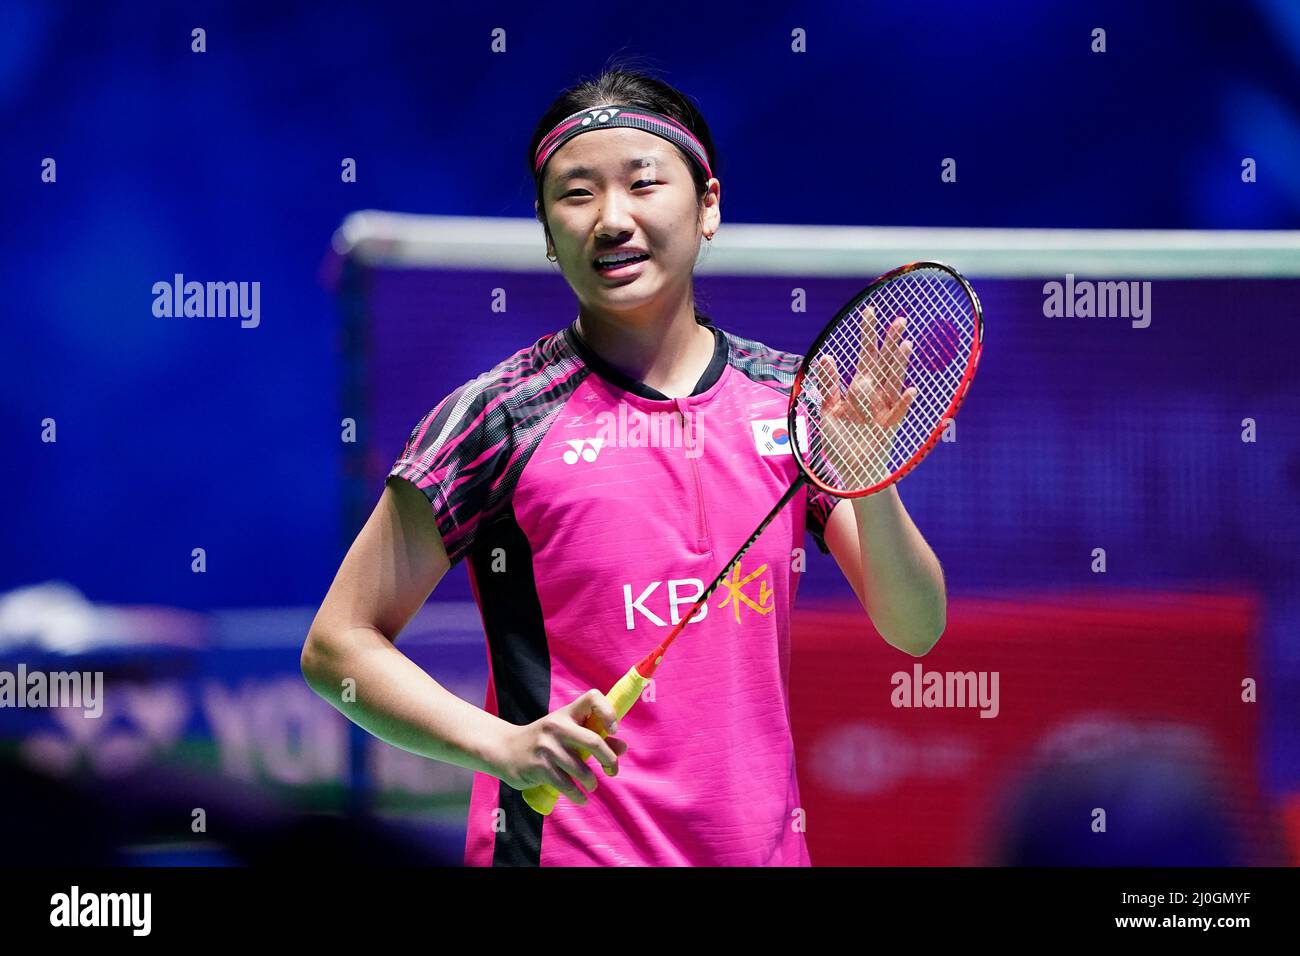 Koreas An Seyoung in action against Taiwans Tai Tzu-ying during day four of the YONEX All England Open Badminton Championships at the Utilita Arena Birmingham